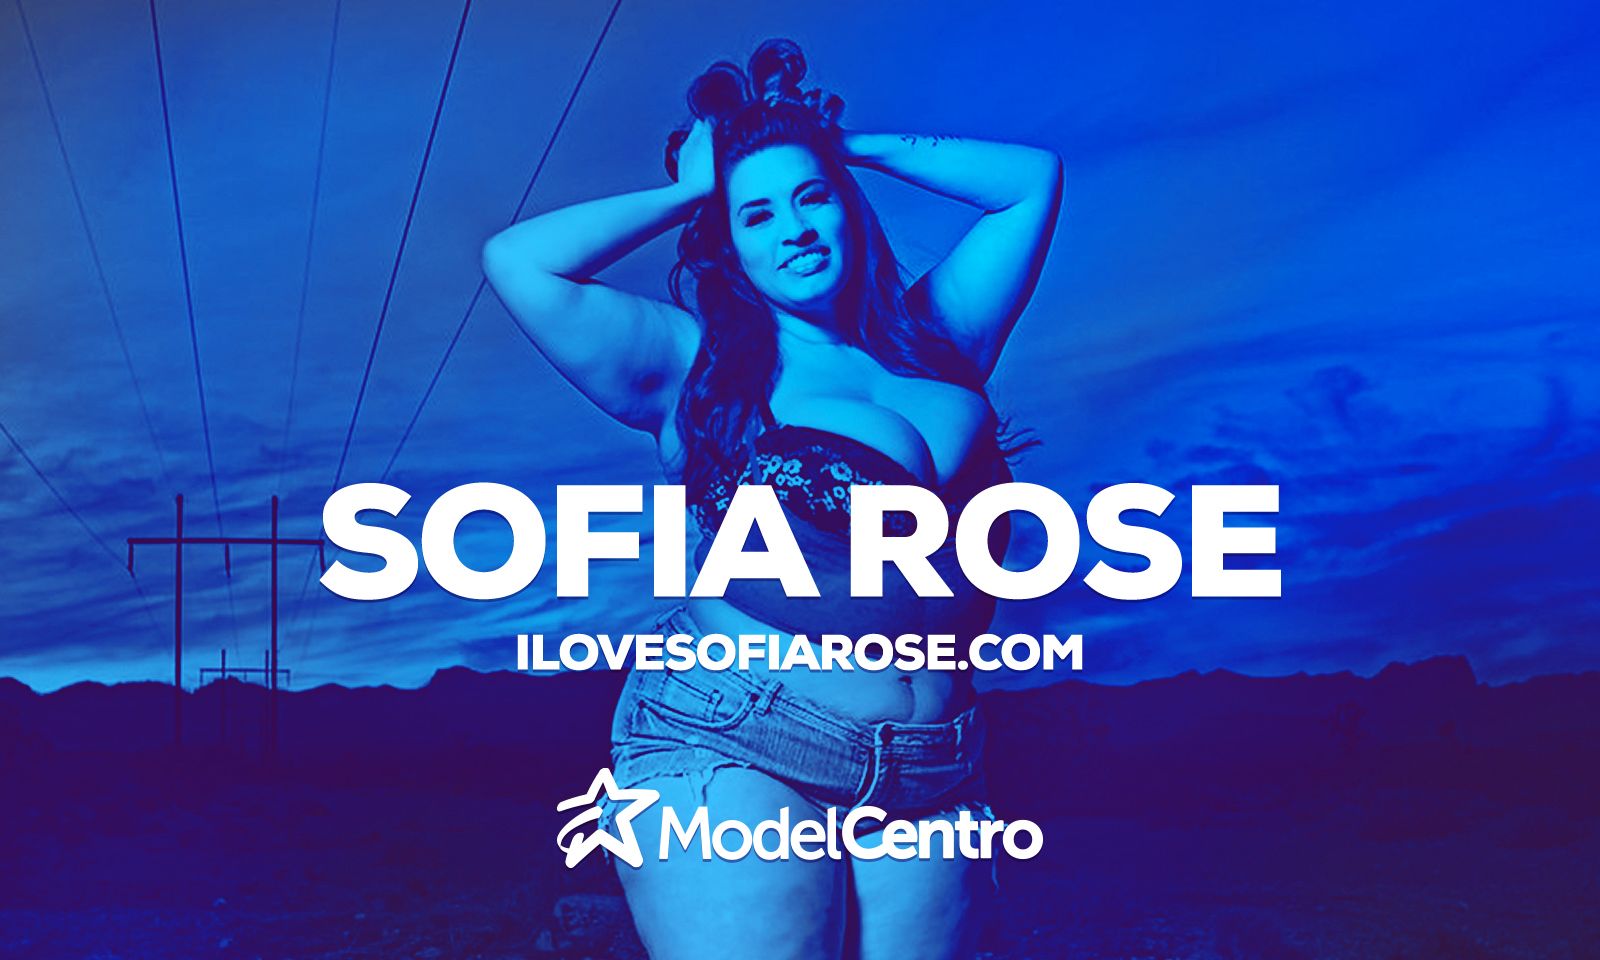 ModelCentro Welcomes Adult Performer Sofia Rose